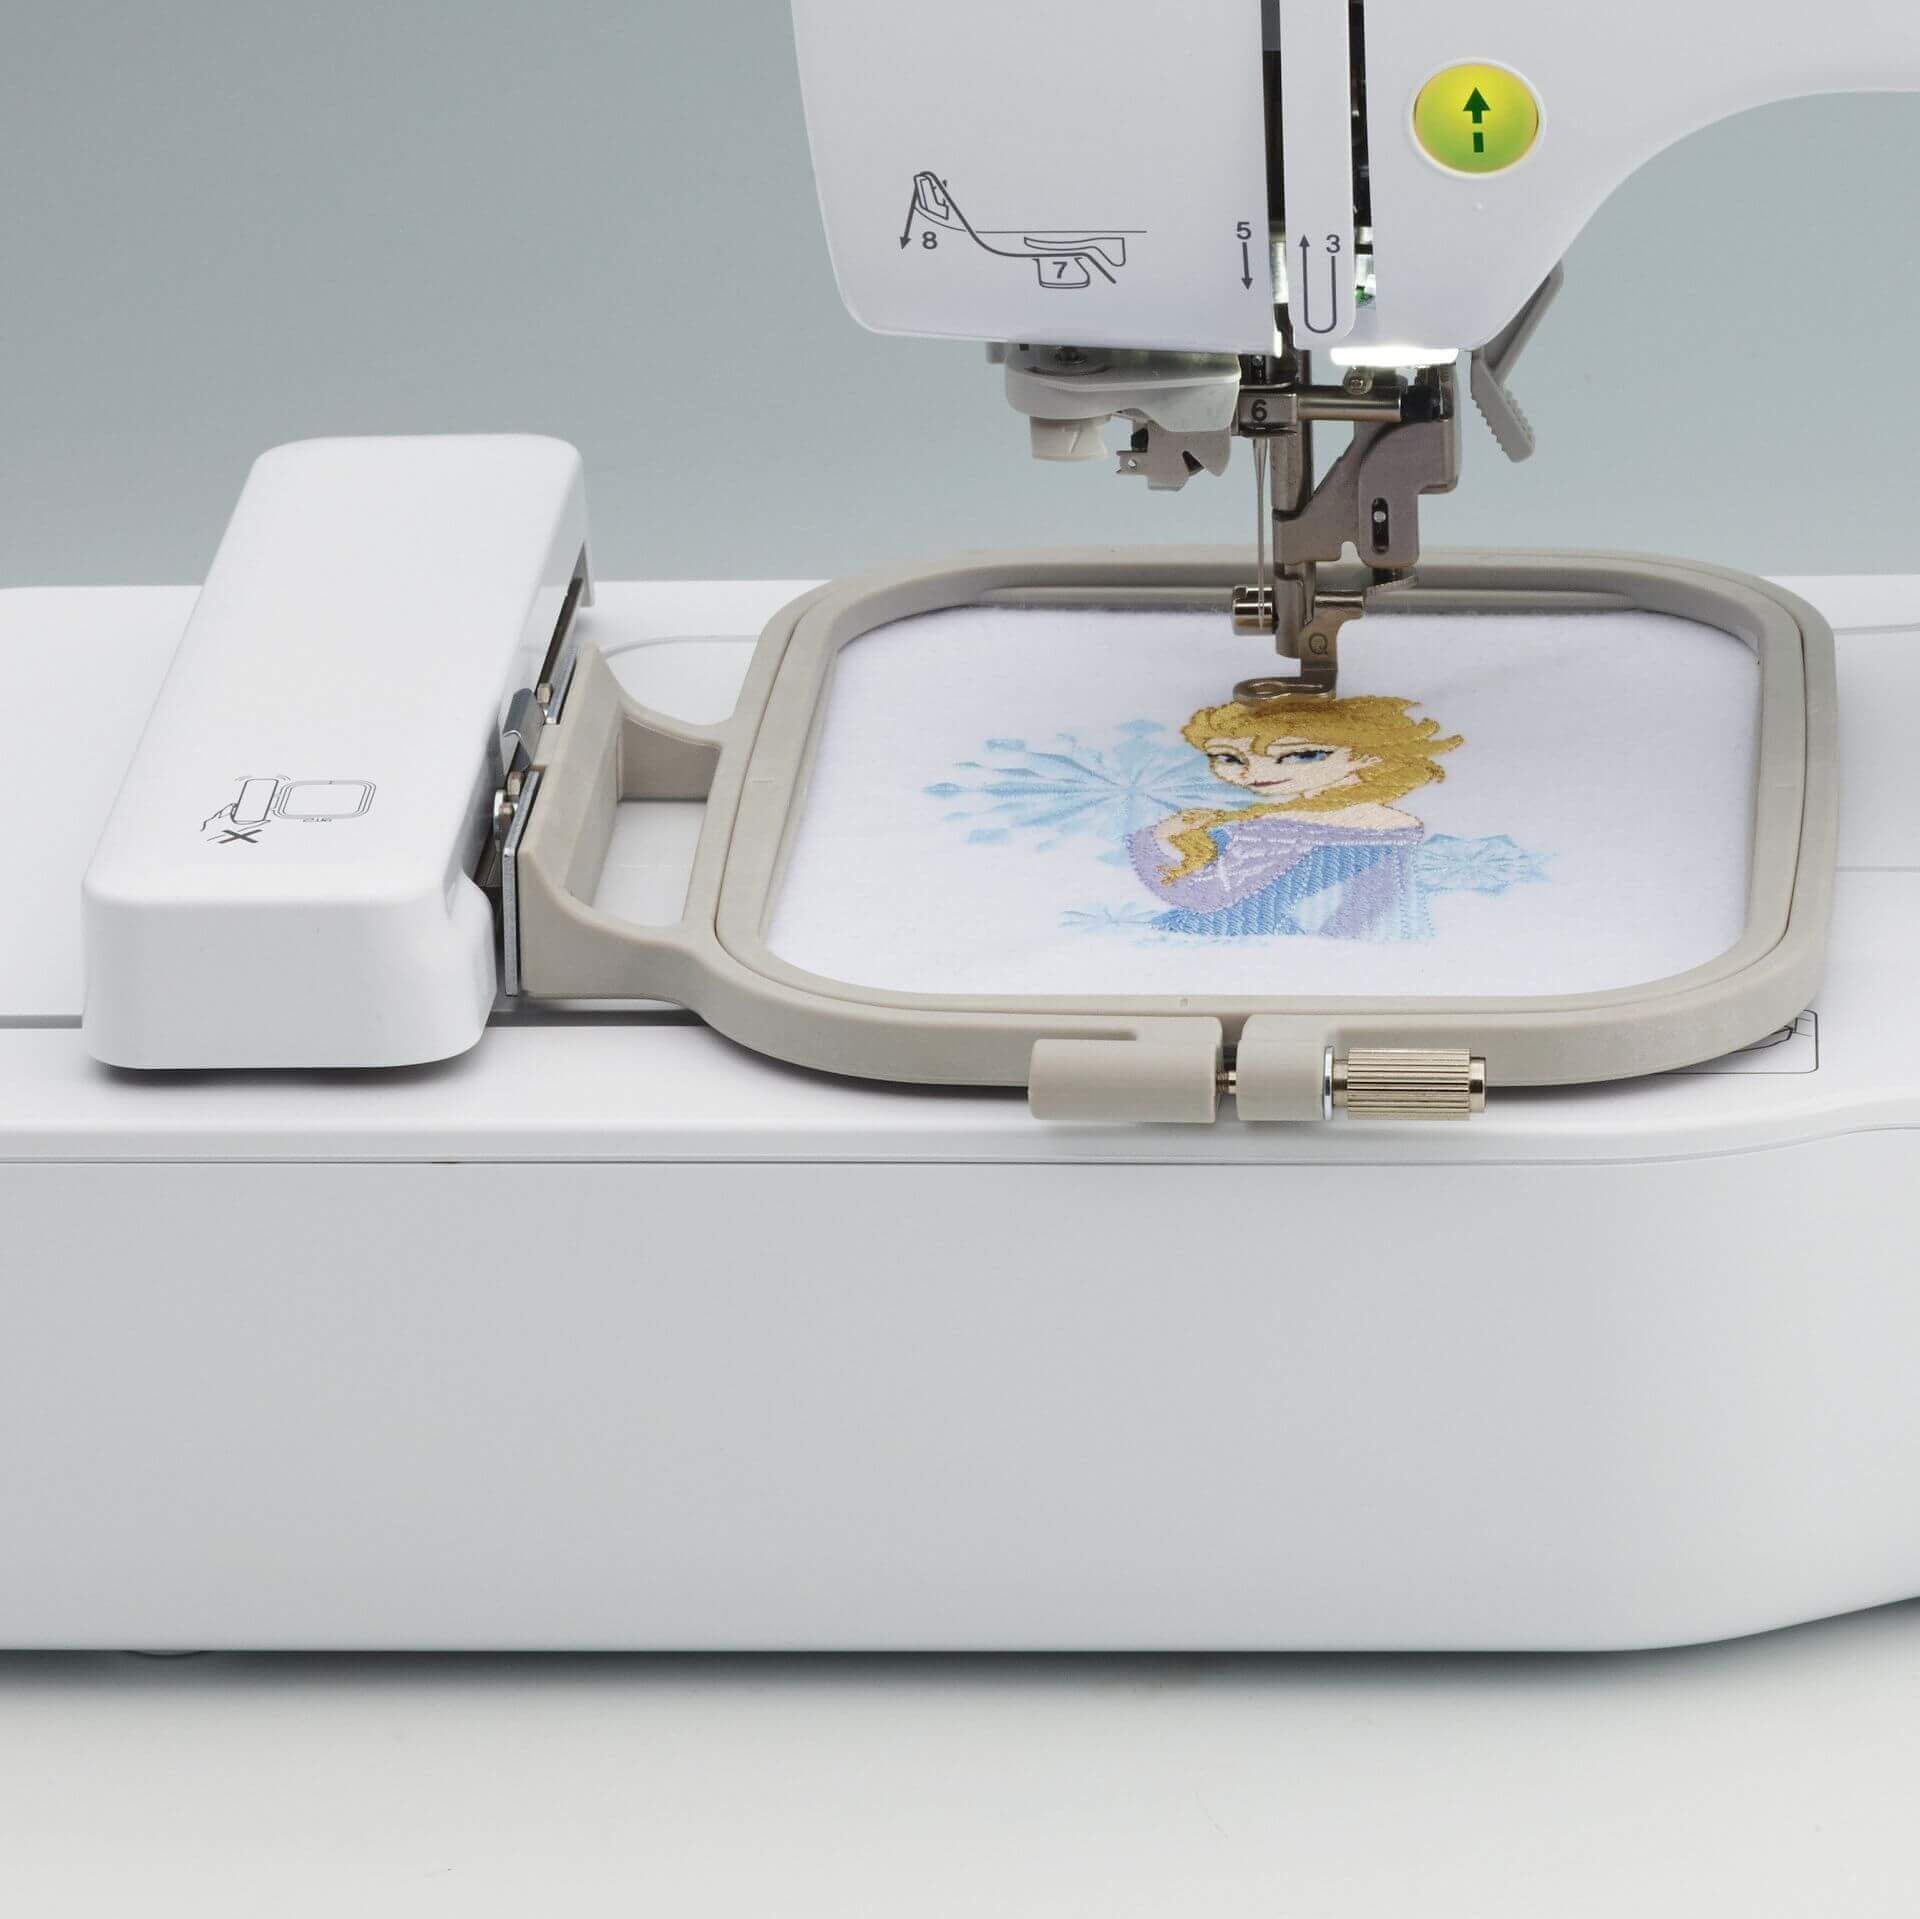 brother PE550D embroidery machine